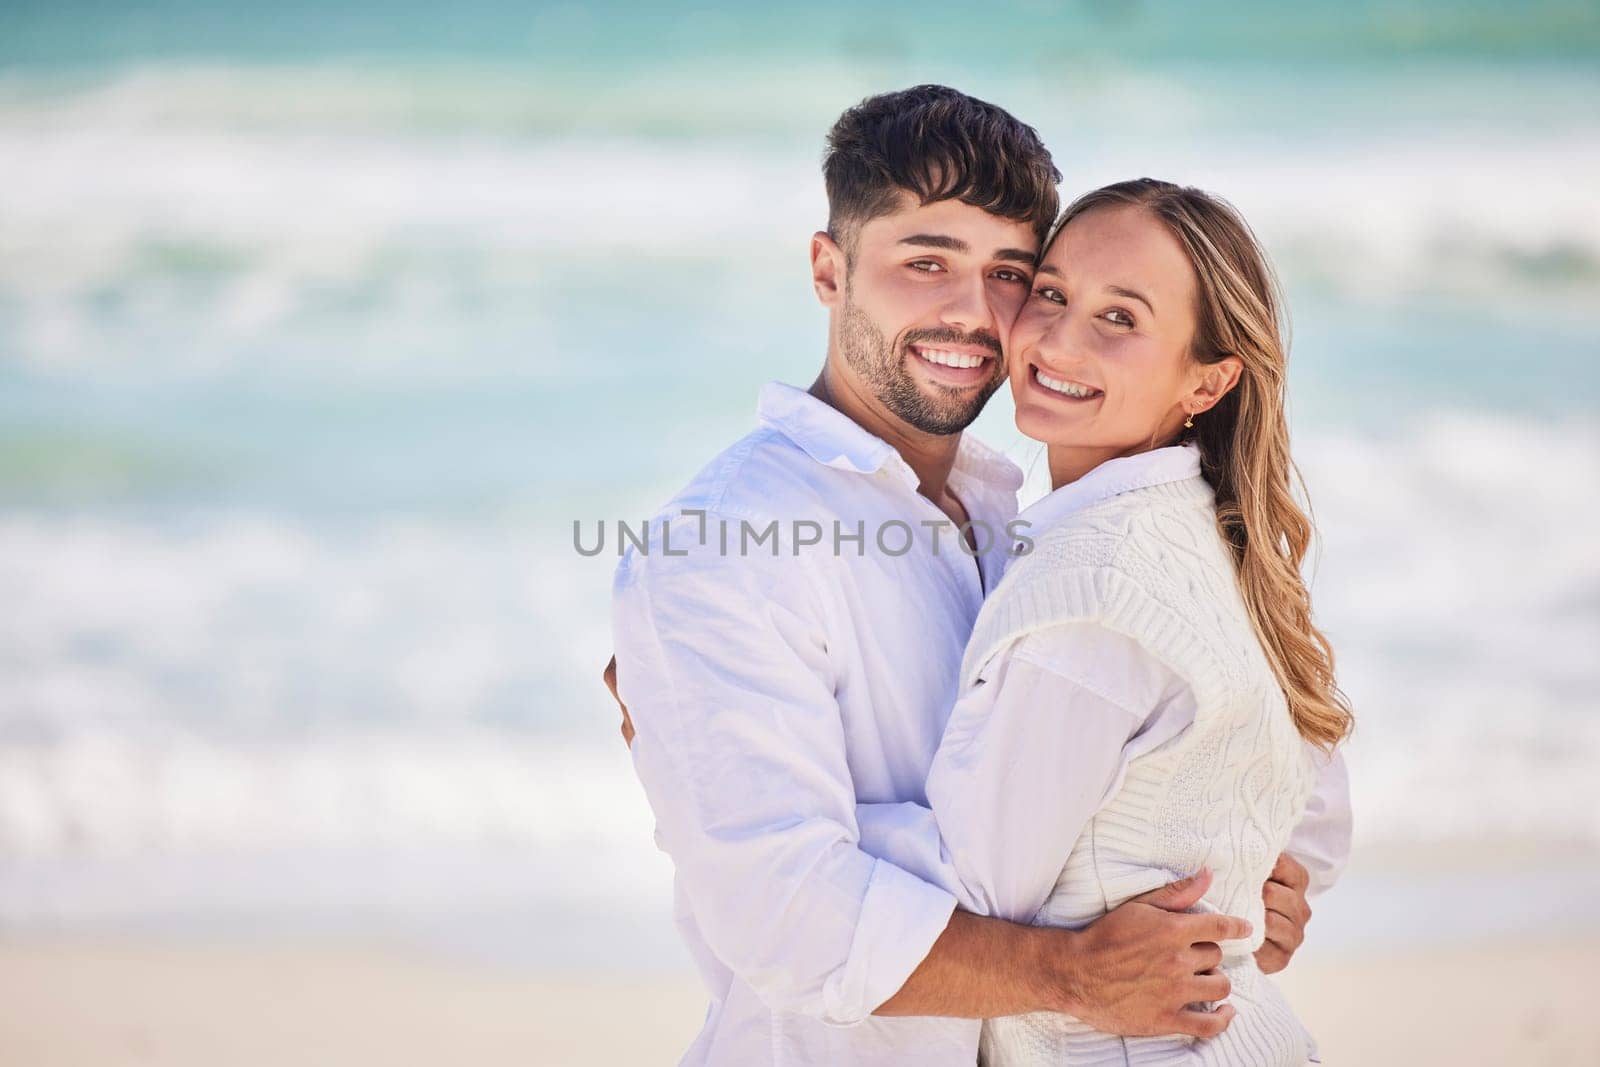 Portrait, love or couple hug at beach on holiday vacation or romantic honeymoon to celebrate marriage commitment. Travel, trust or woman bonding or hugging a happy partner in fun summer romance.